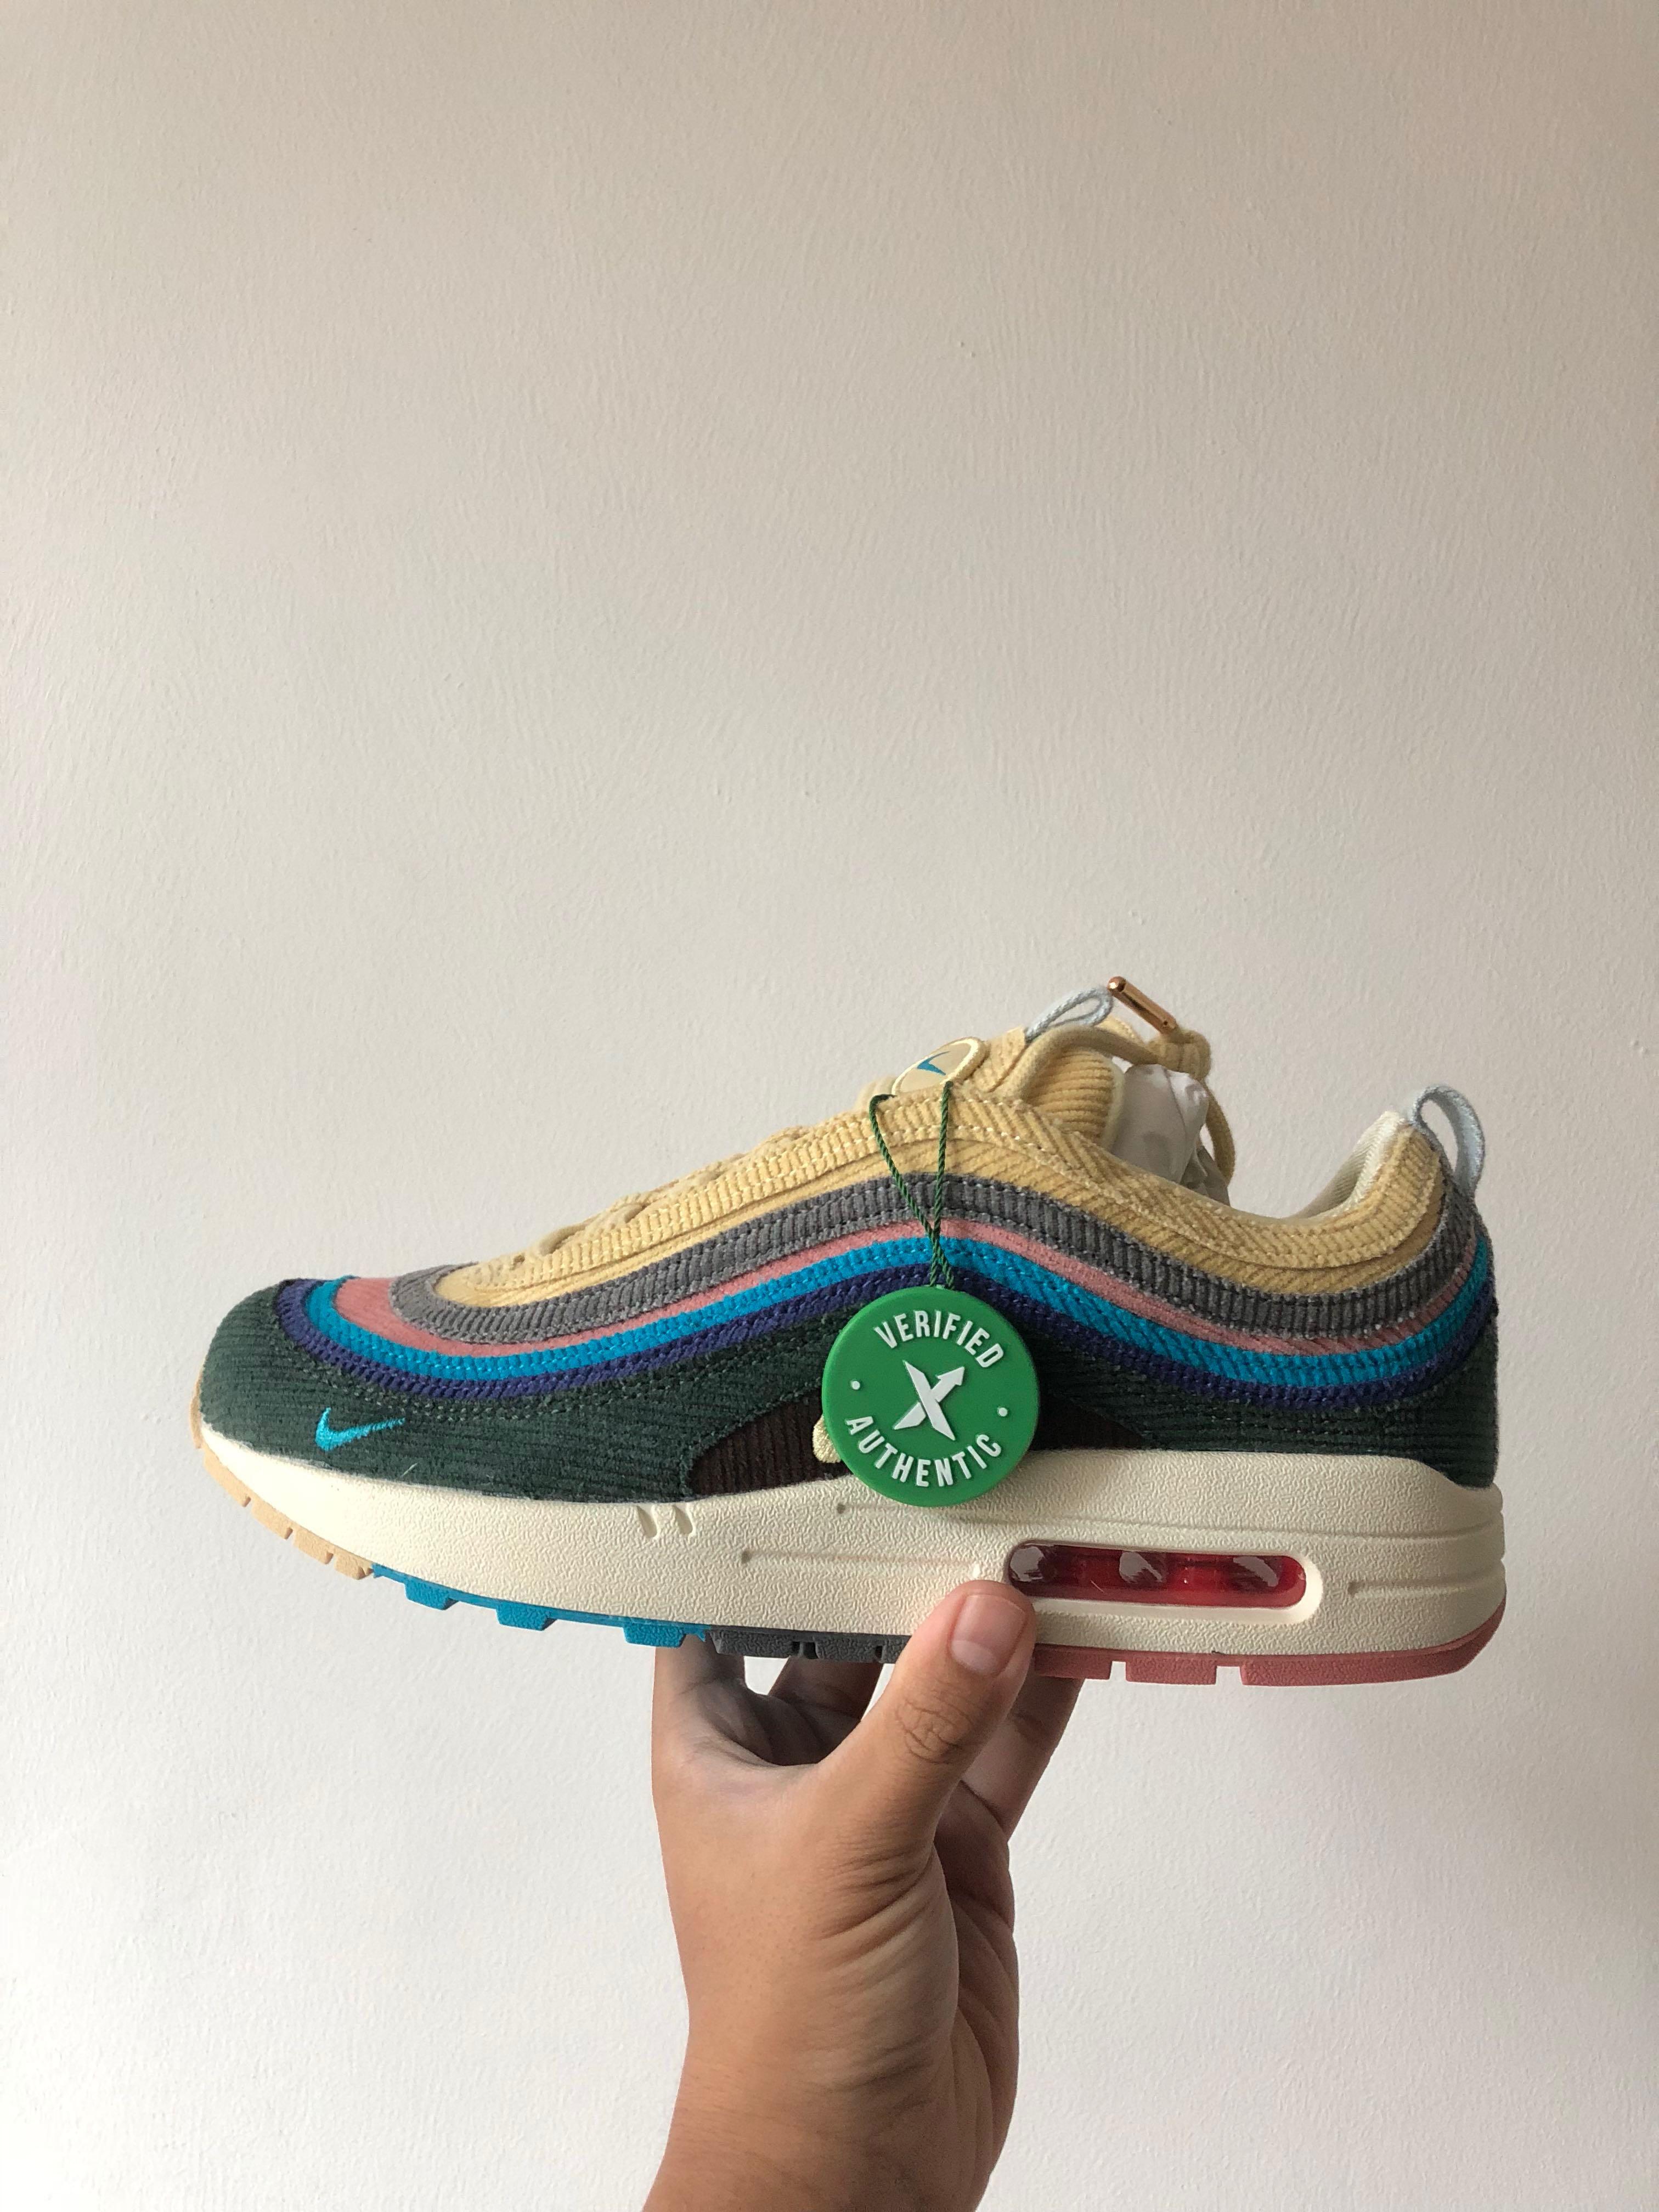 sean wotherspoon 97 stockx